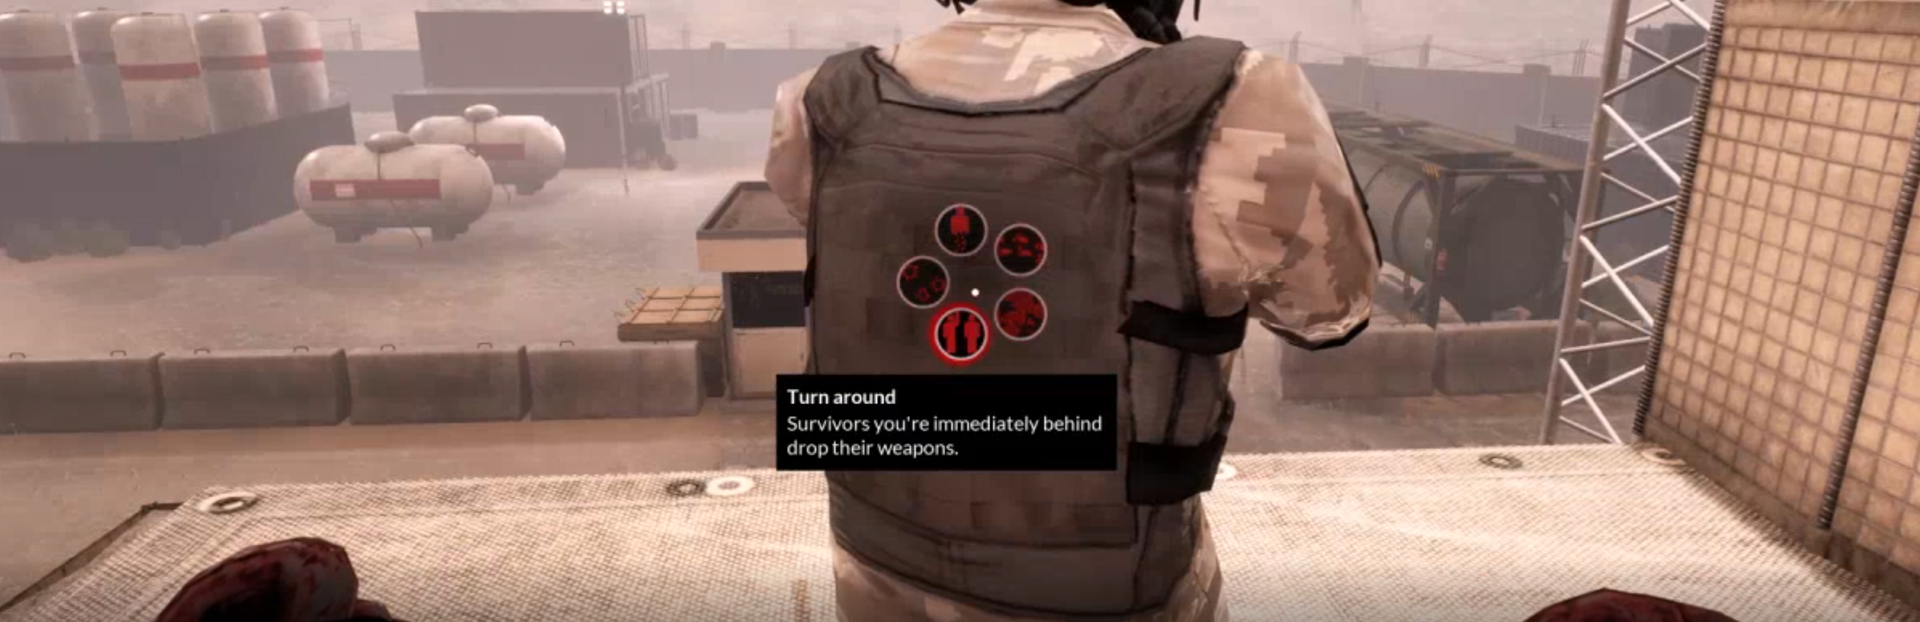 Obscurity Taunts will be available to improve your chances of wiping out the enemy